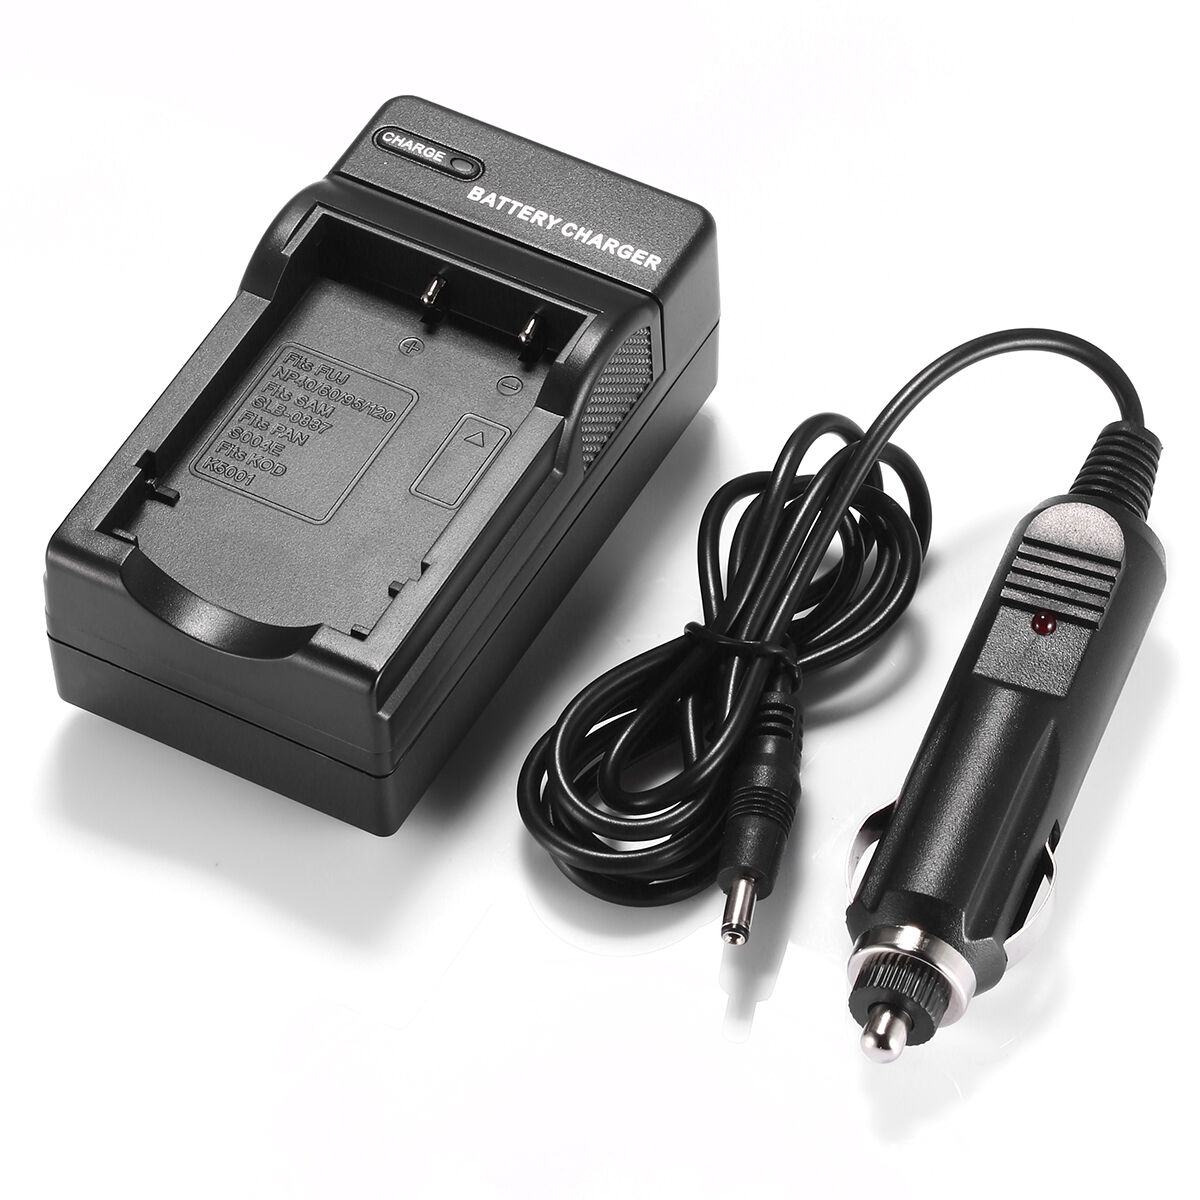 CASIO NP-110 battery charger